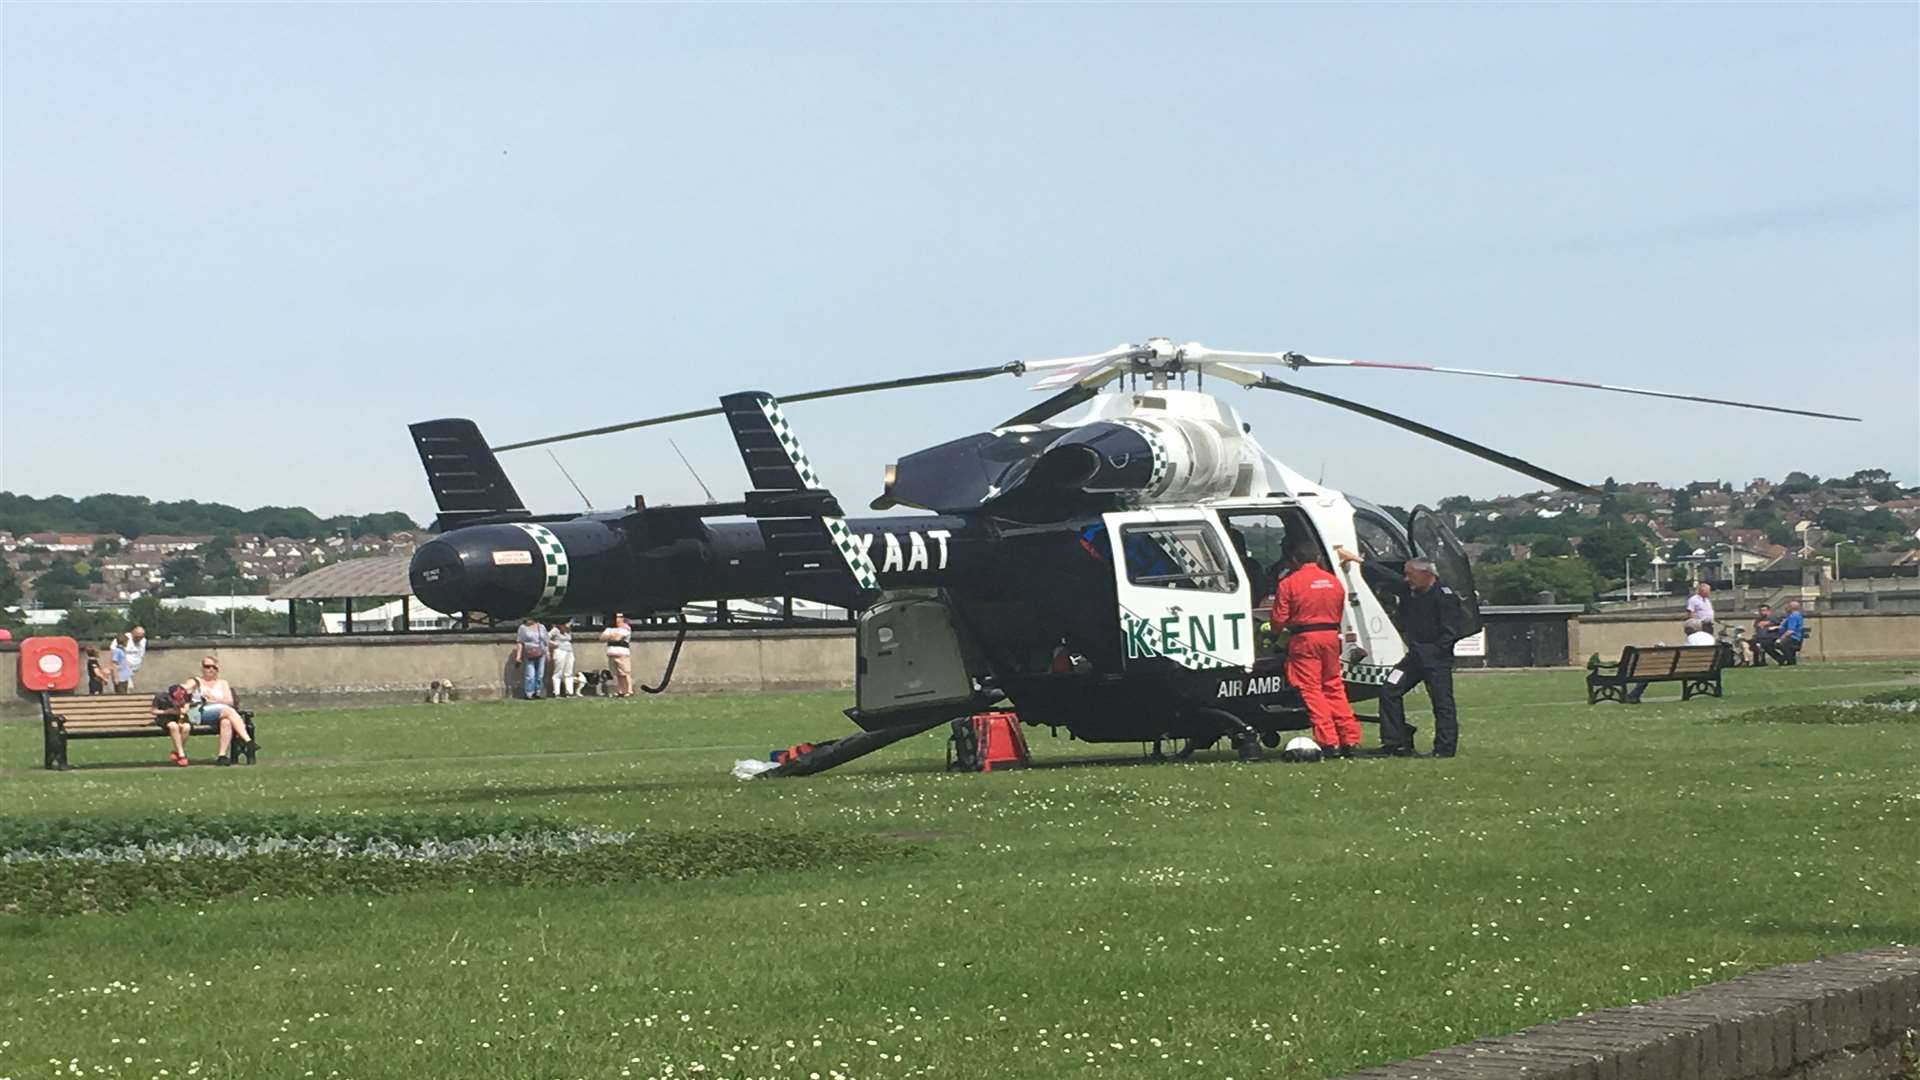 The Kent Air Ambulance landed on The Esplanade.